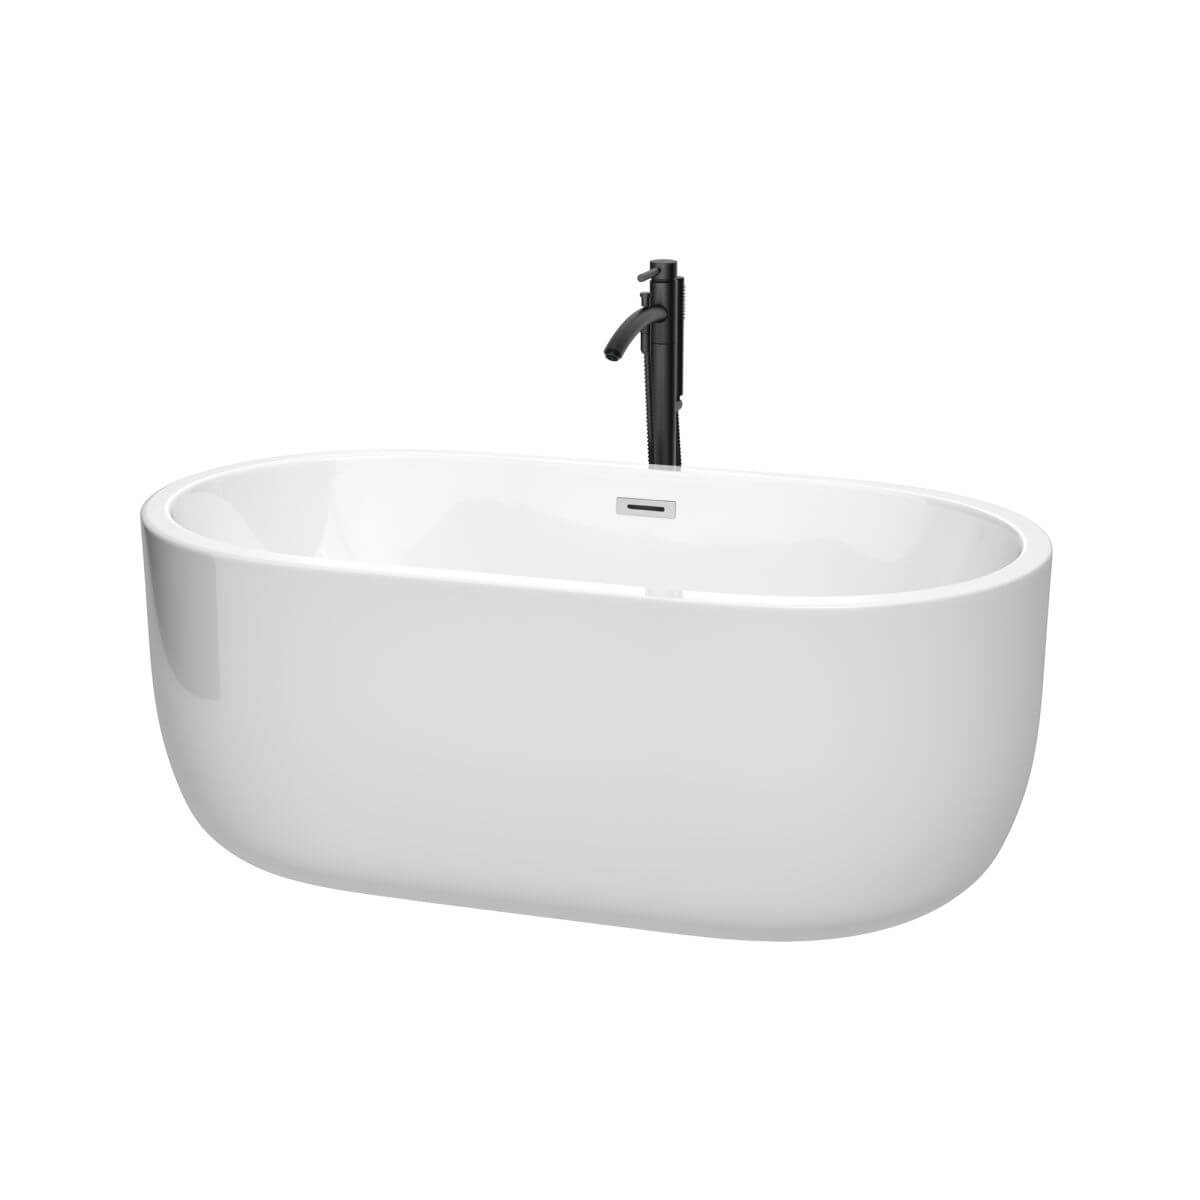 Wyndham Collection Juliette 60 inch Freestanding Bathtub in White with Polished Chrome Trim and Floor Mounted Faucet in Matte Black - WCOBT101360PCATPBK